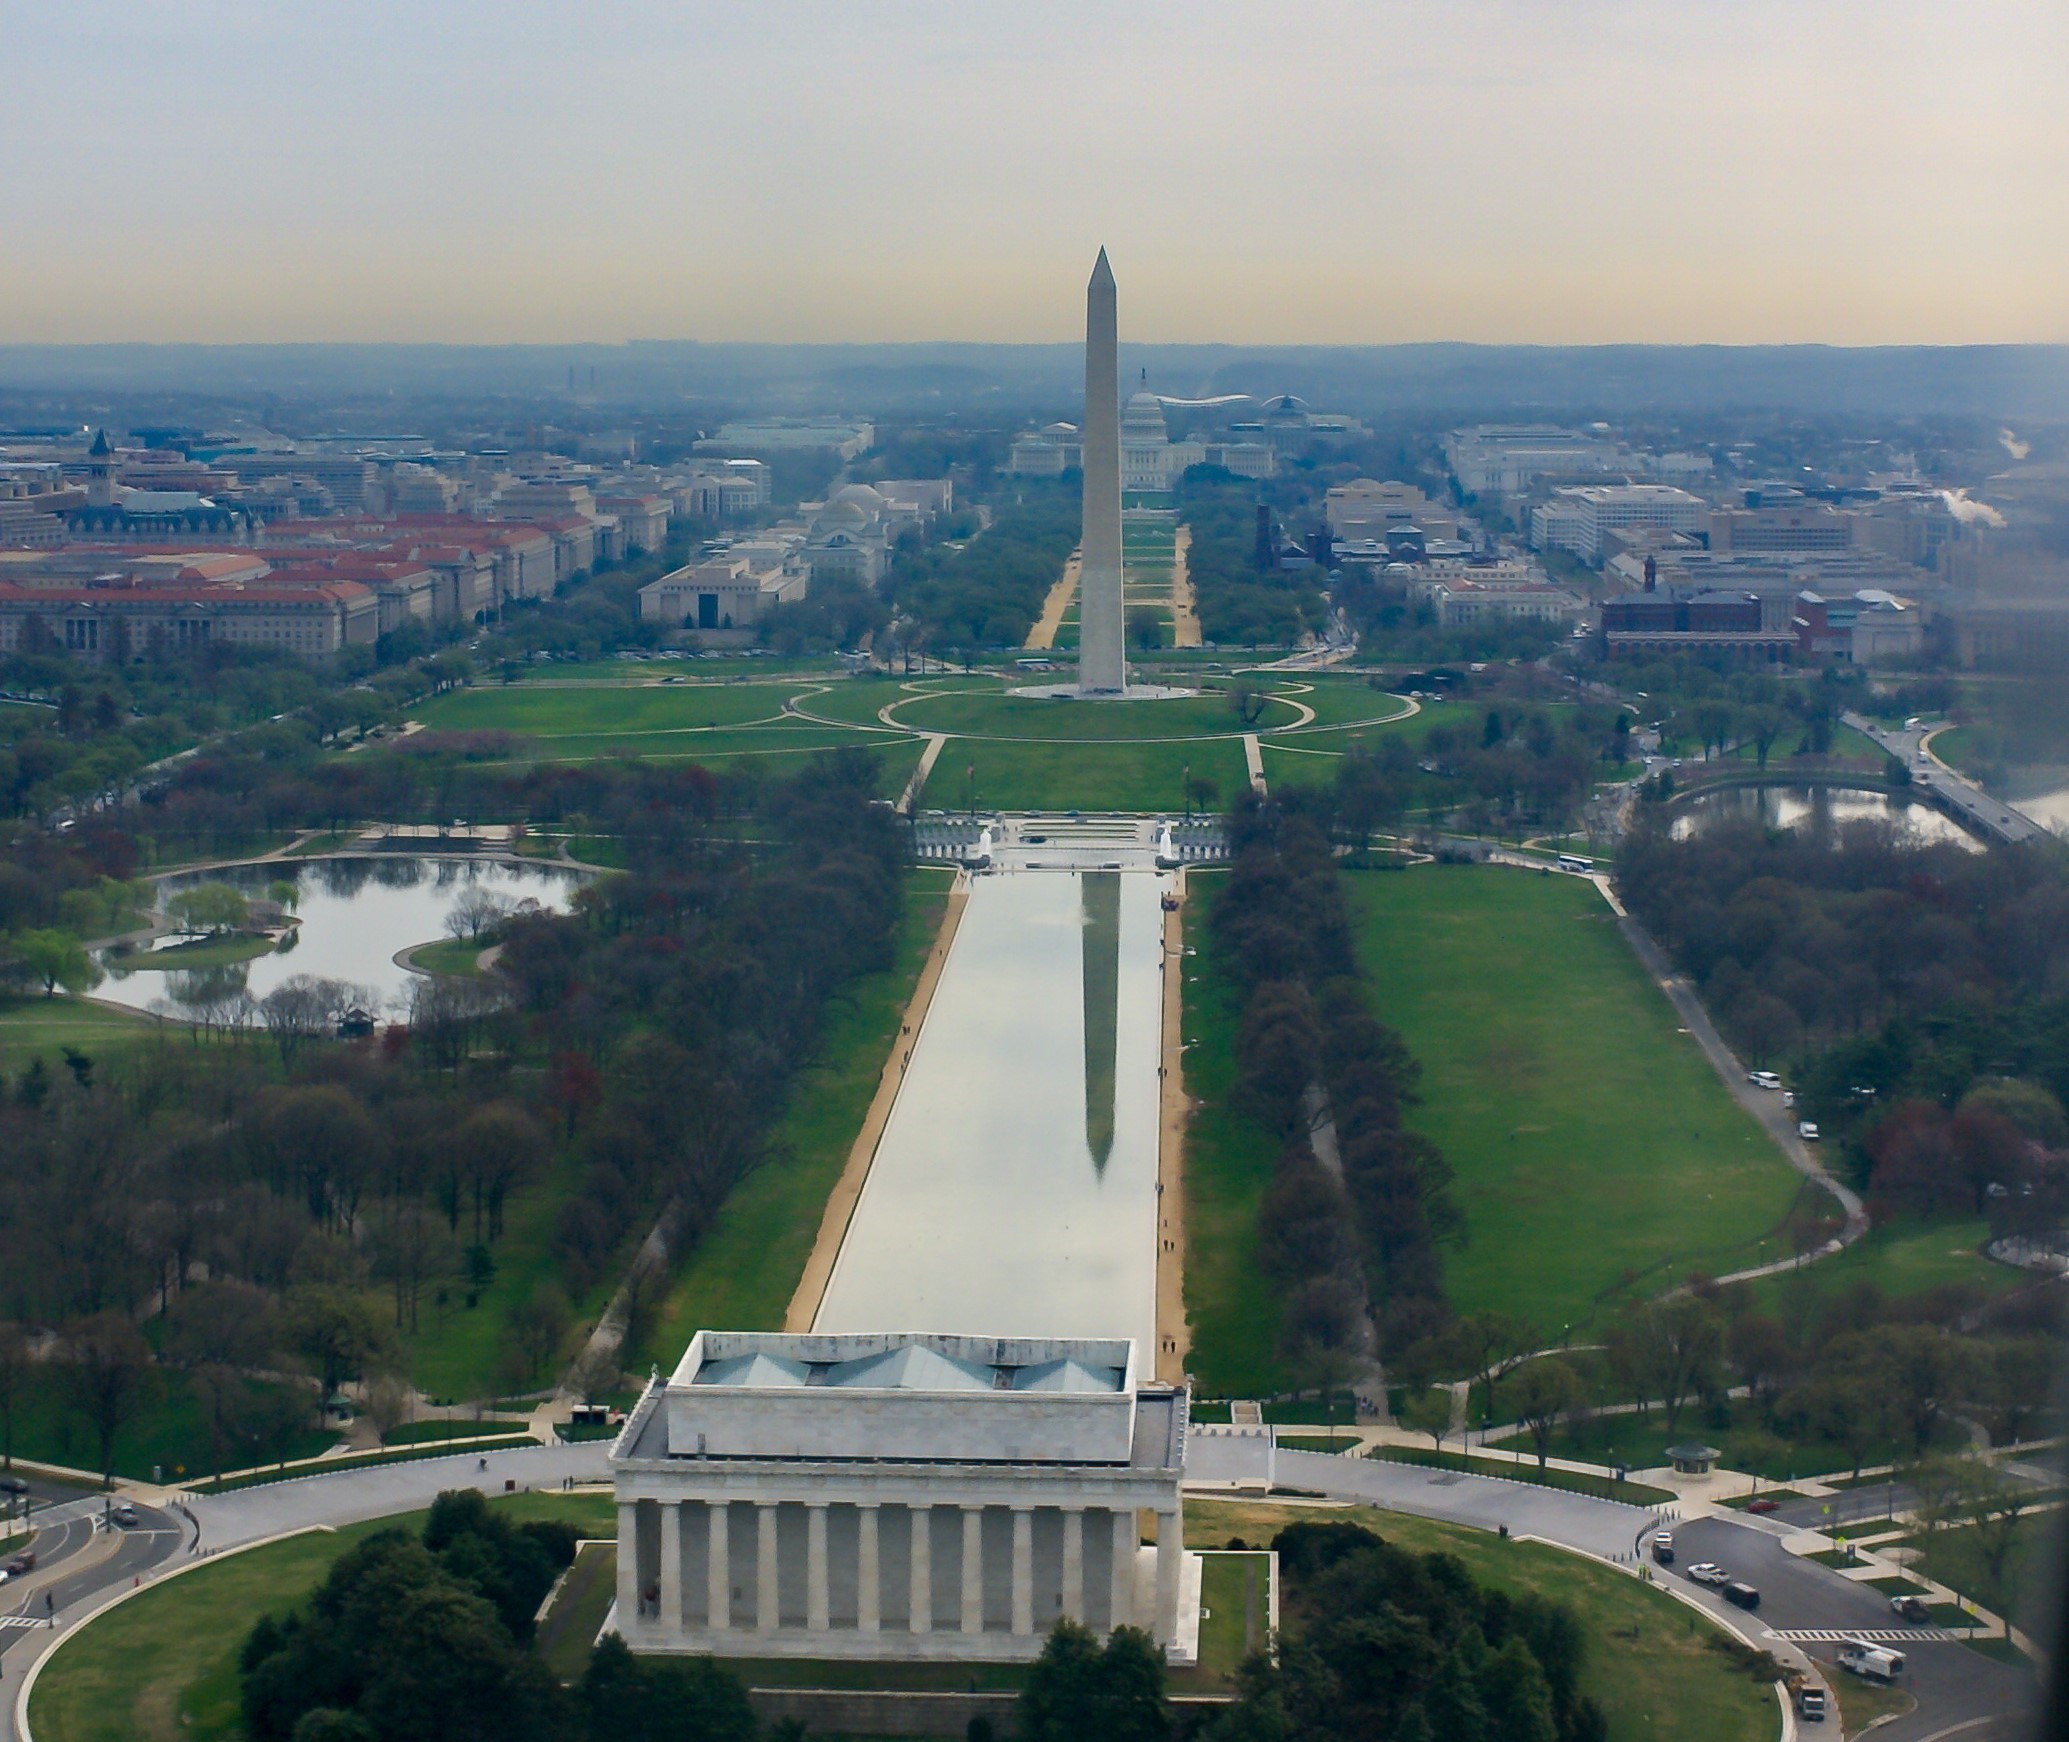 Aerial view of National Mall from Capital to Washington Monument